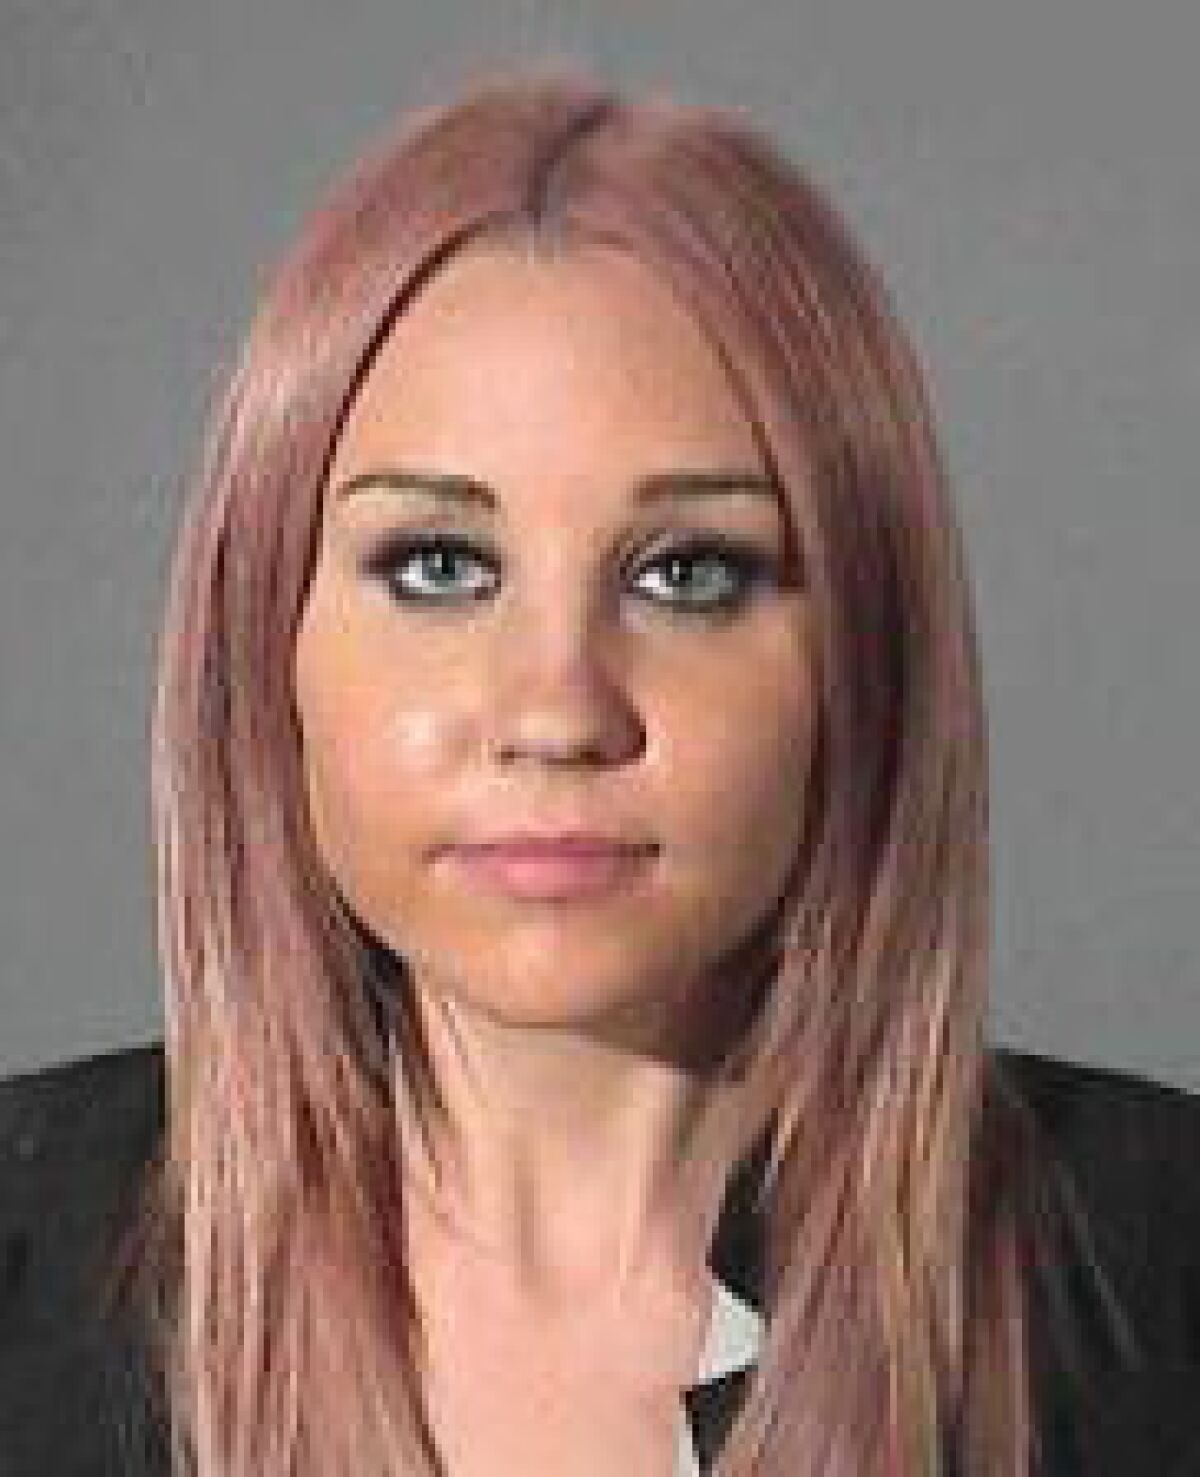 An L.A. County Sheriff's Department booking photo of actress Amanda Bynes.